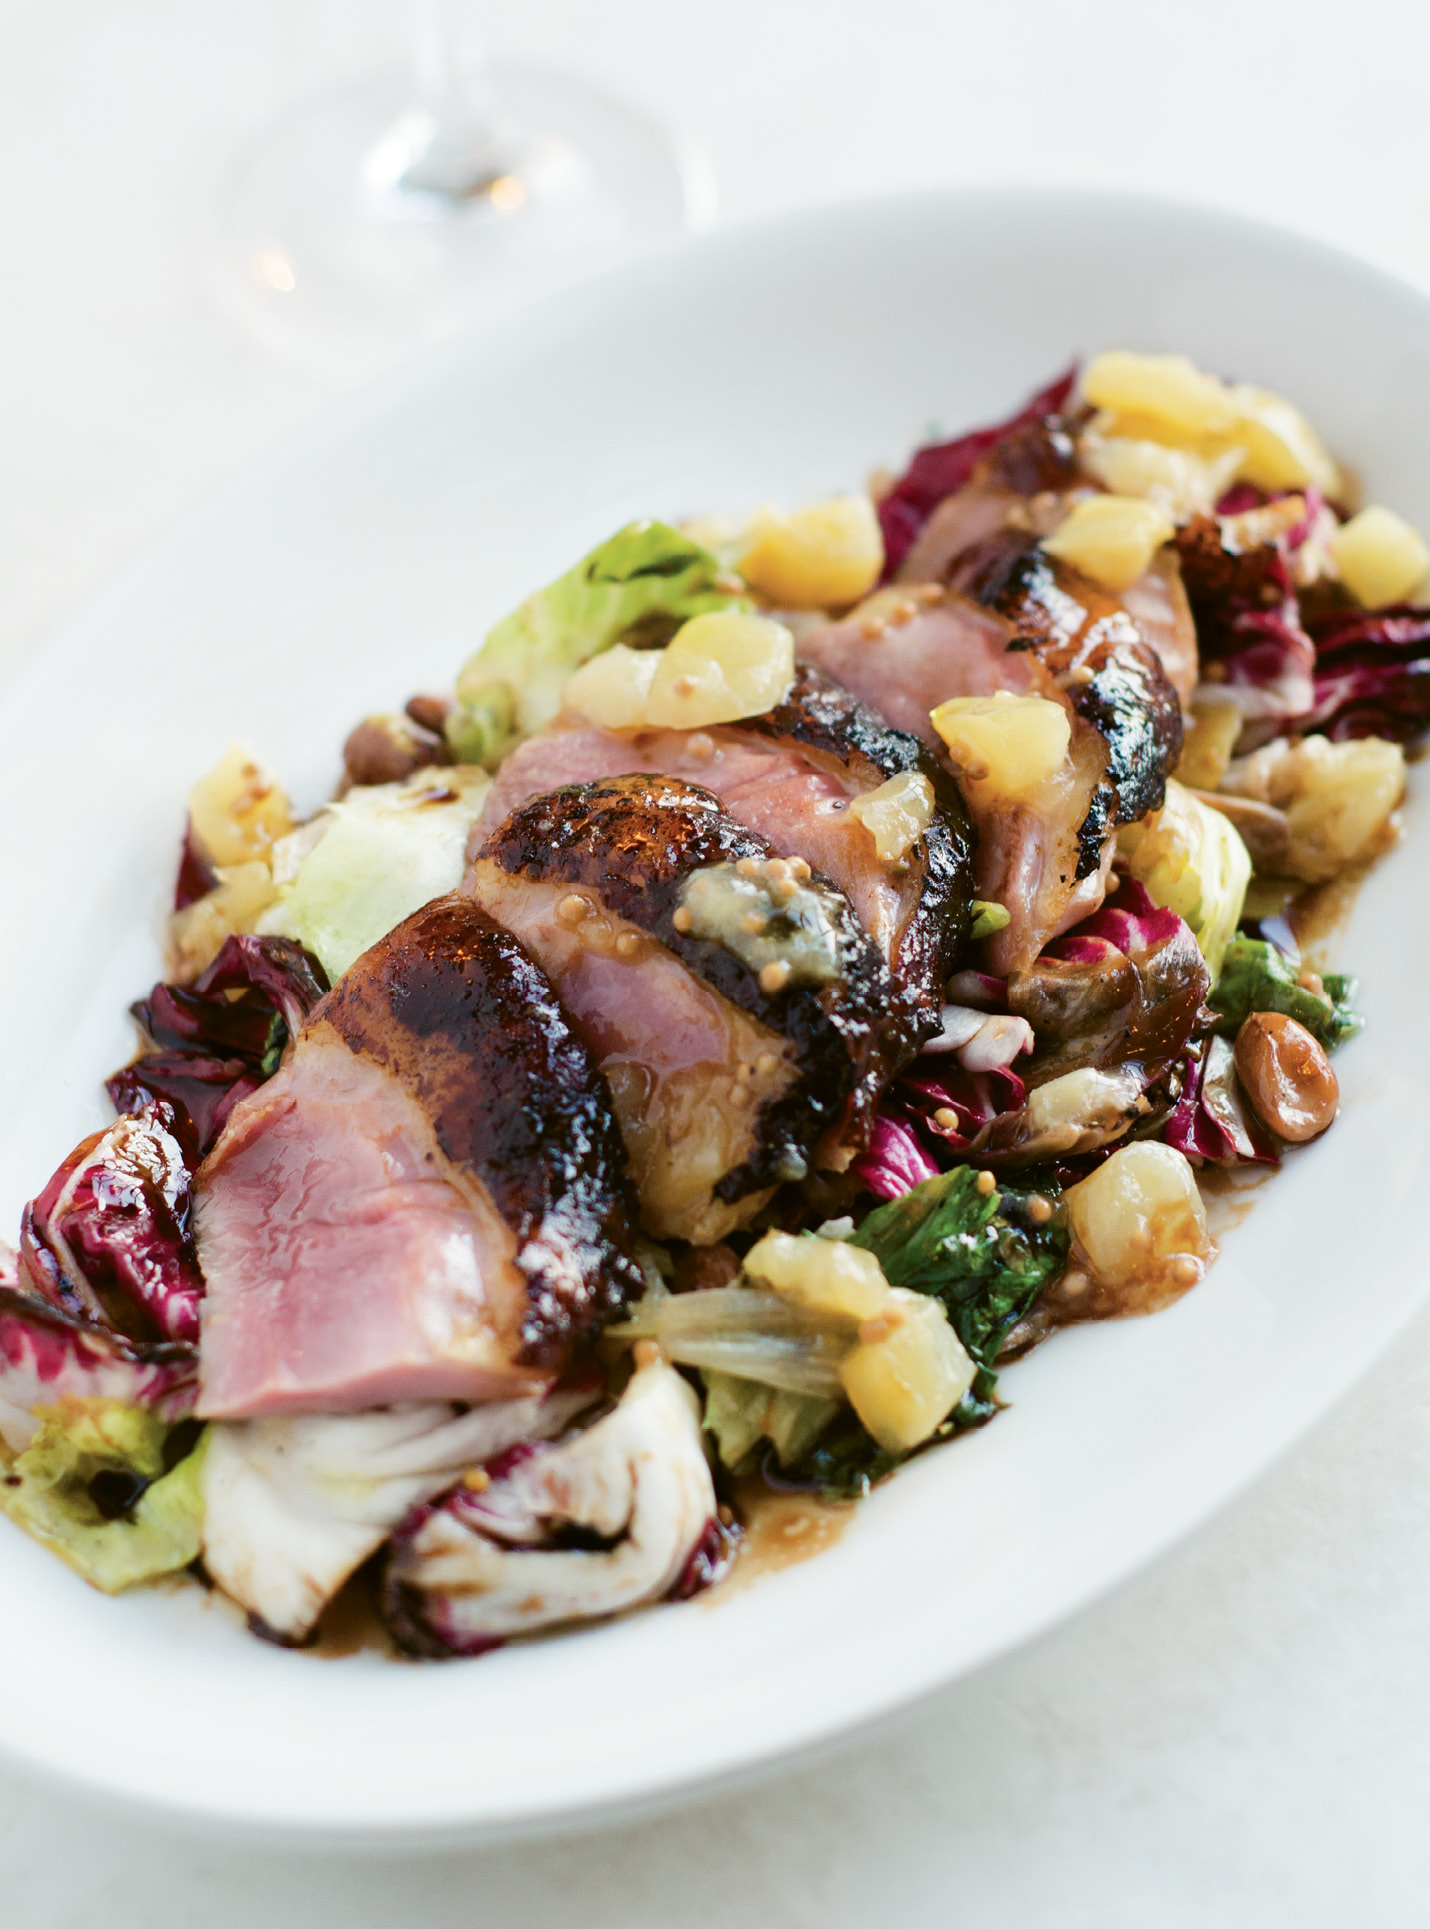 In Luck with Duck:  Slices of tender roasted duck breast with grilled radicchio and escarole and a spicy apple mostarda.